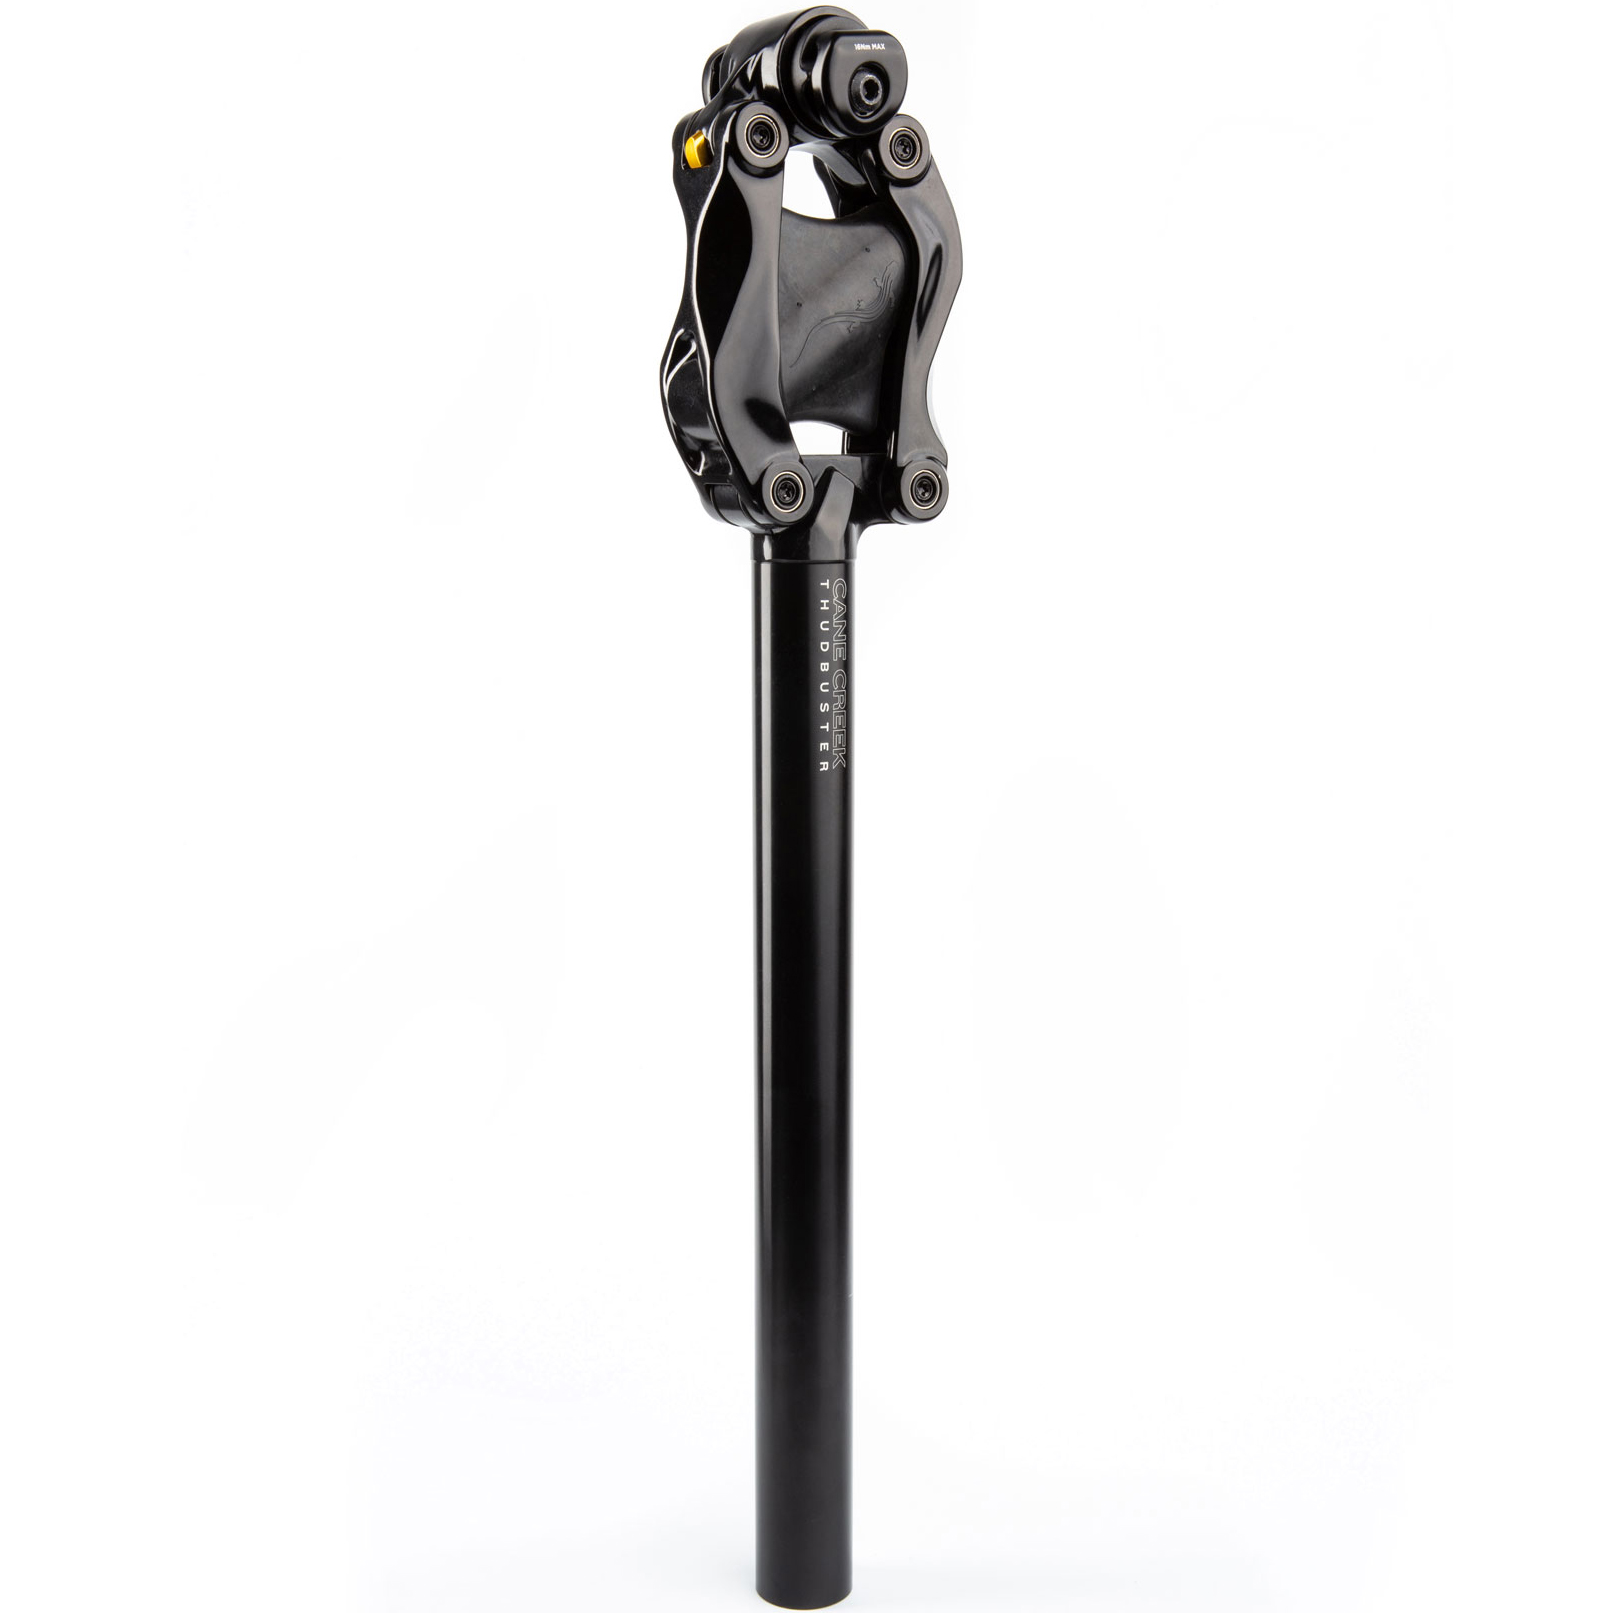 Picture of Cane Creek Thudbuster G4 LT Seatpost - 420mm - Ø 30.9 mm